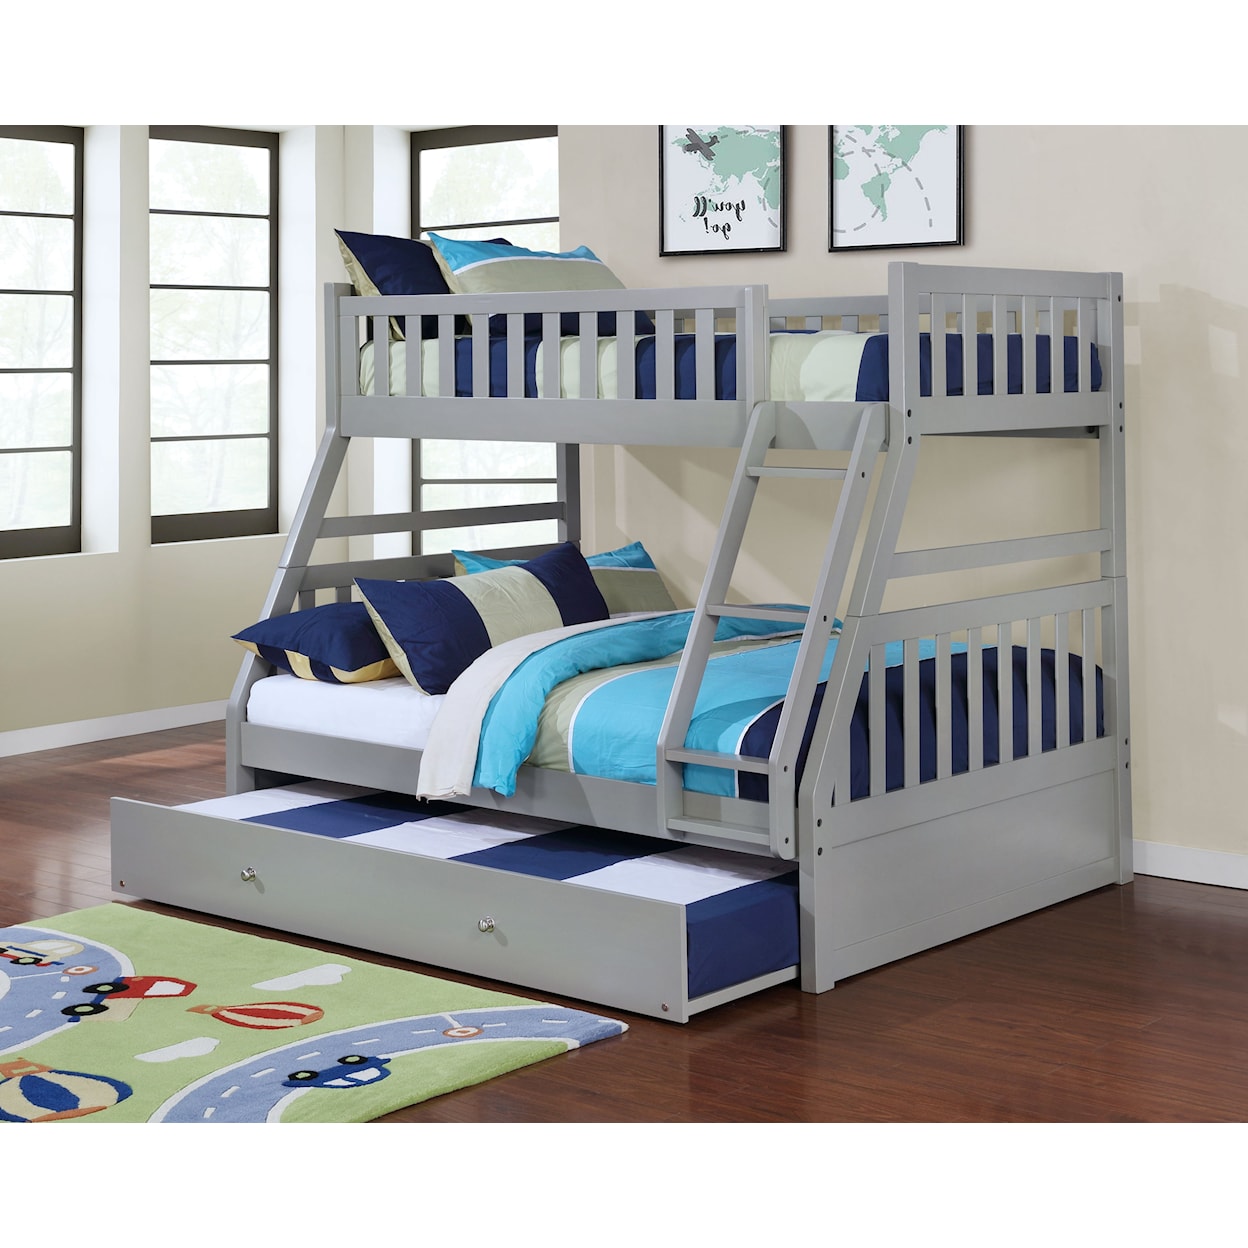 Lifestyle B803G Twin over Full Bunk Bed